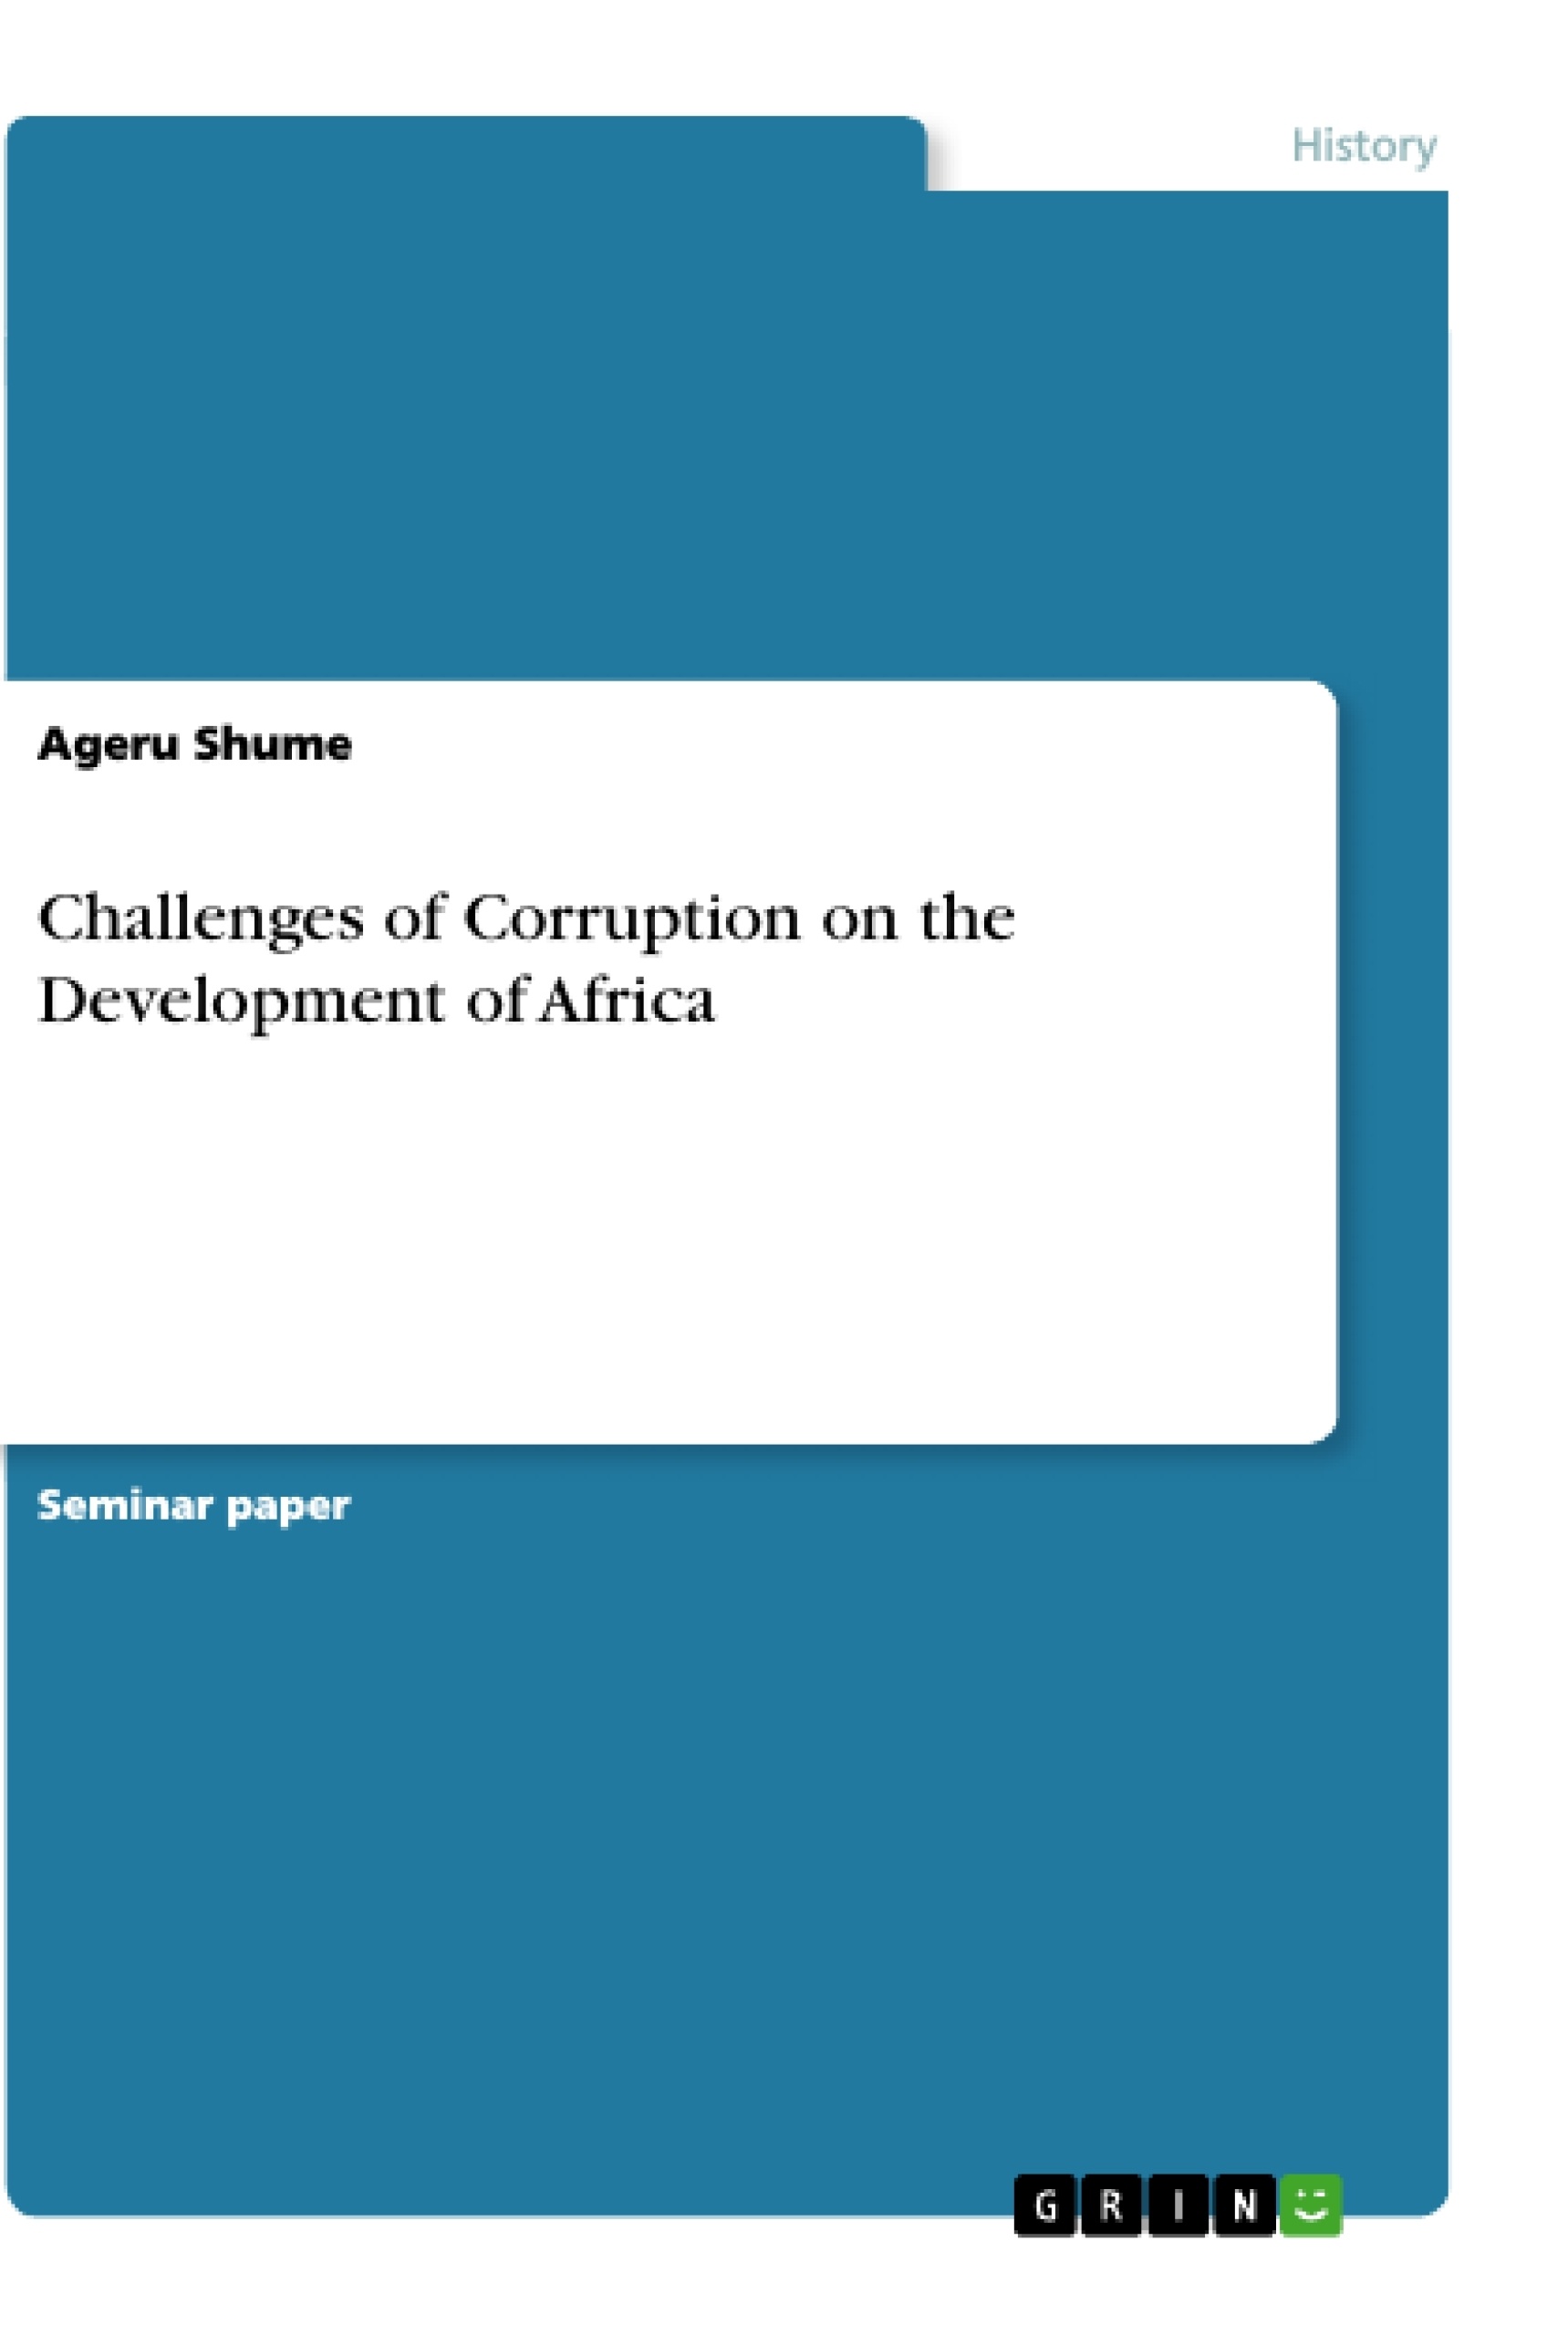 Title: Challenges of Corruption on the Development of Africa